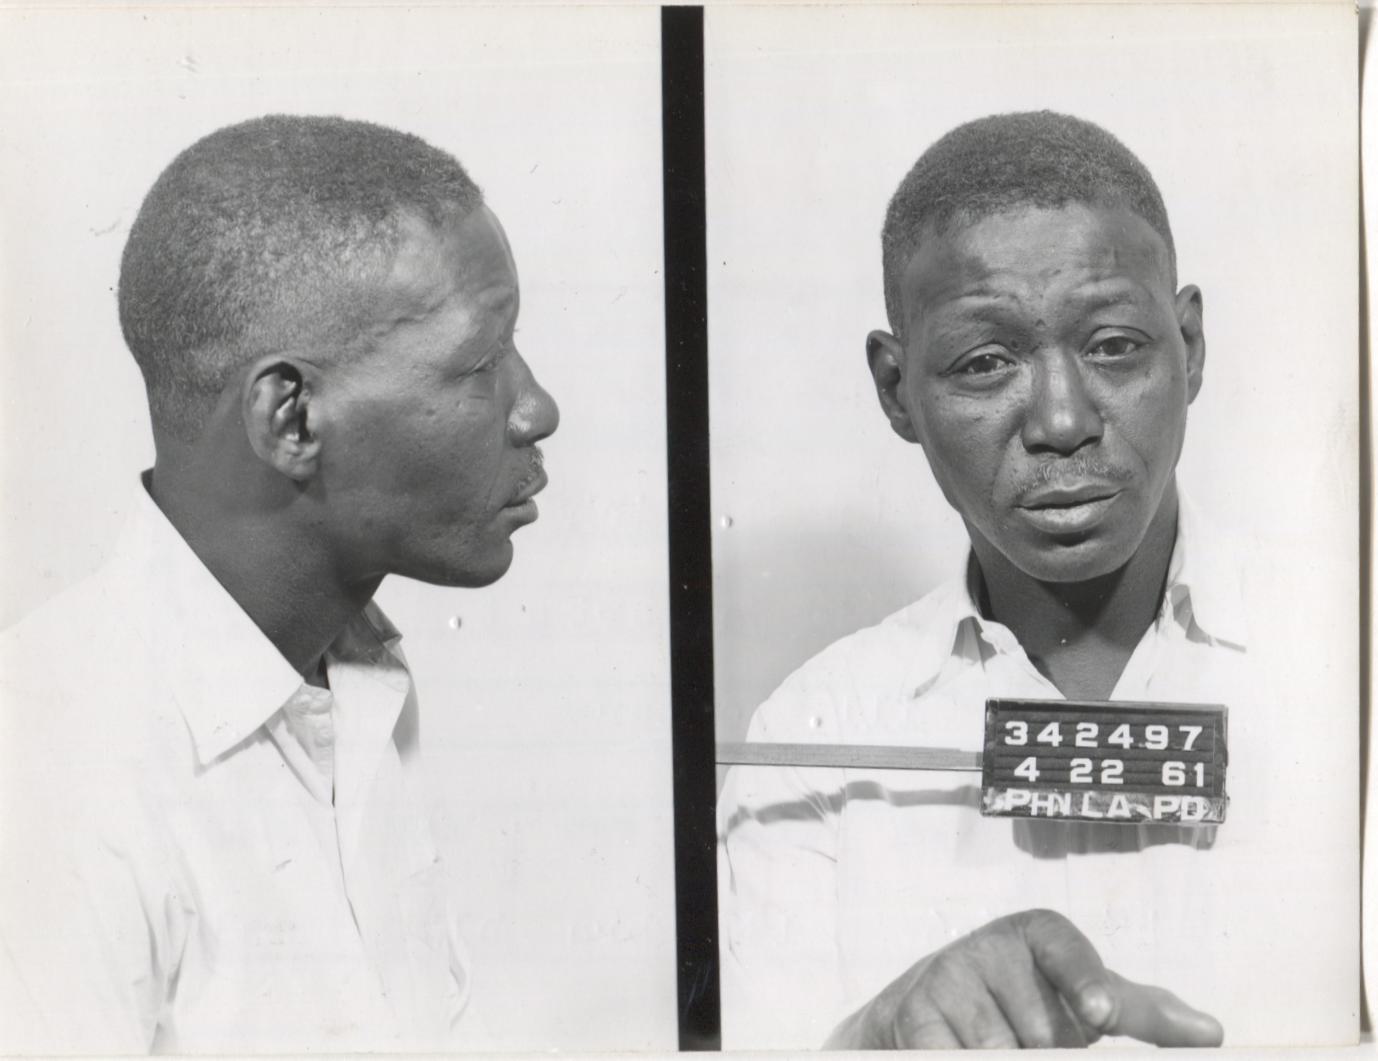 King D. Rich Mugshot - Arrested on 4/22/1961 for Illegal Lottery